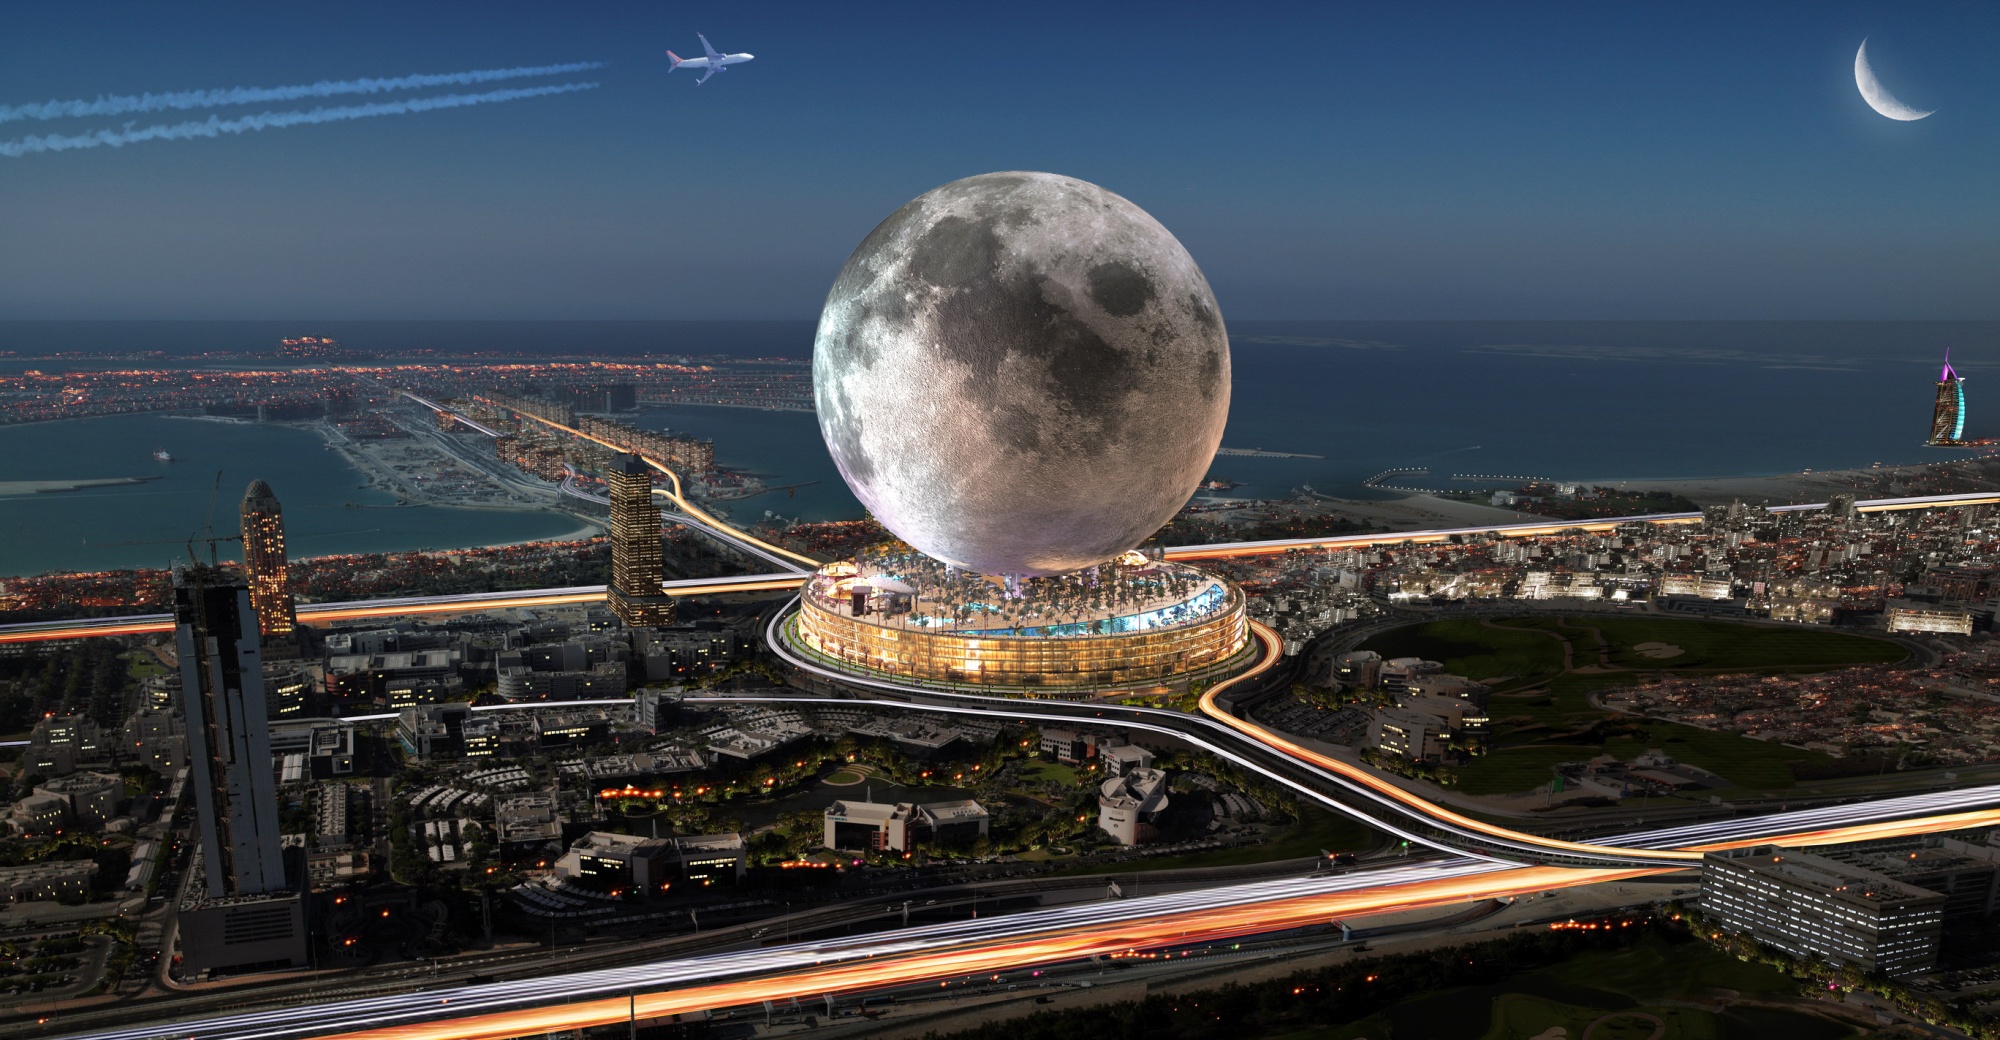 A Canadian firm has created a rendering of what a giant resort recreating the moon, if built on the site of the stalled Dubai Pearl project, could look like.